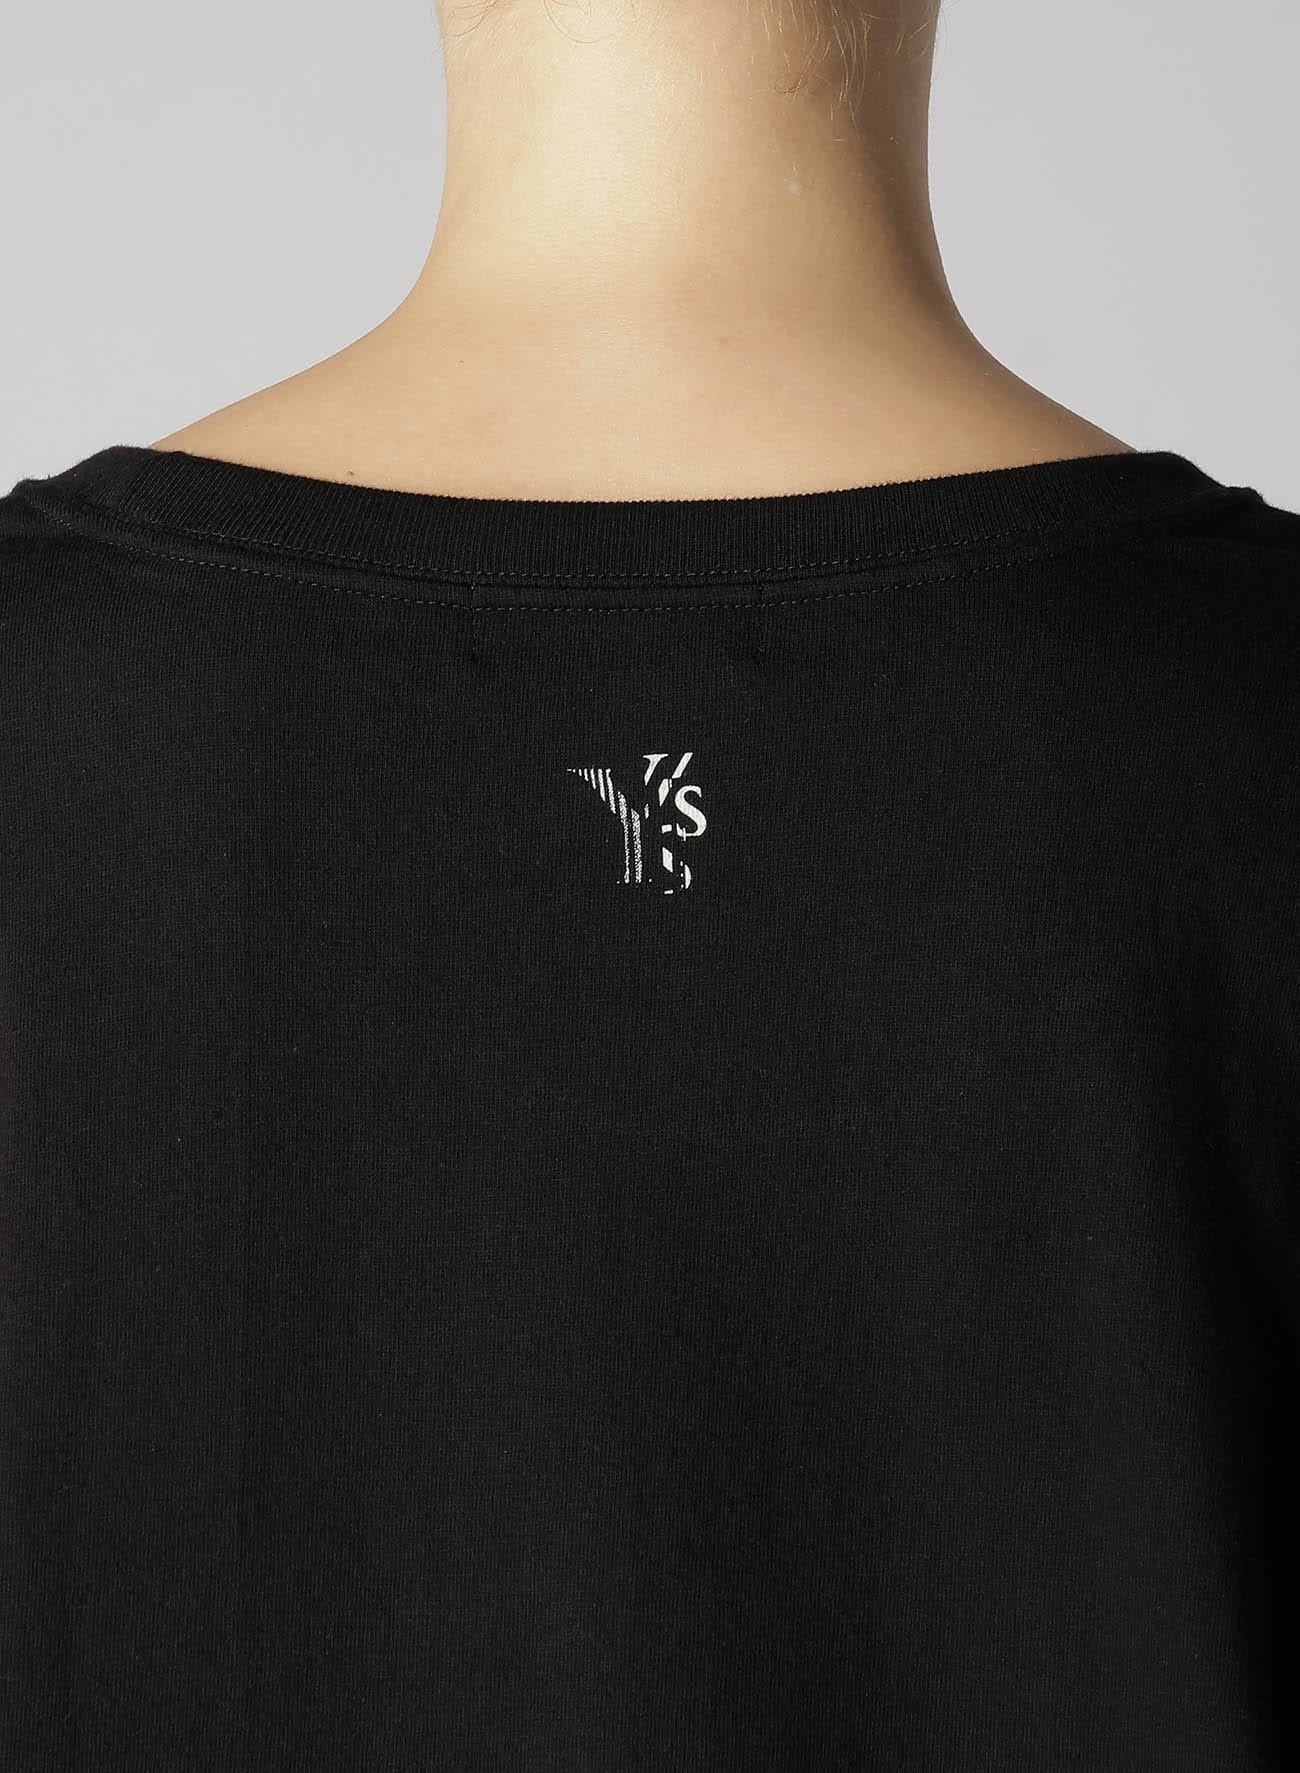 [Y's x MAX VADUKUL]PICTURE PIGMENT LONG SLEEVE T-SHIRTS